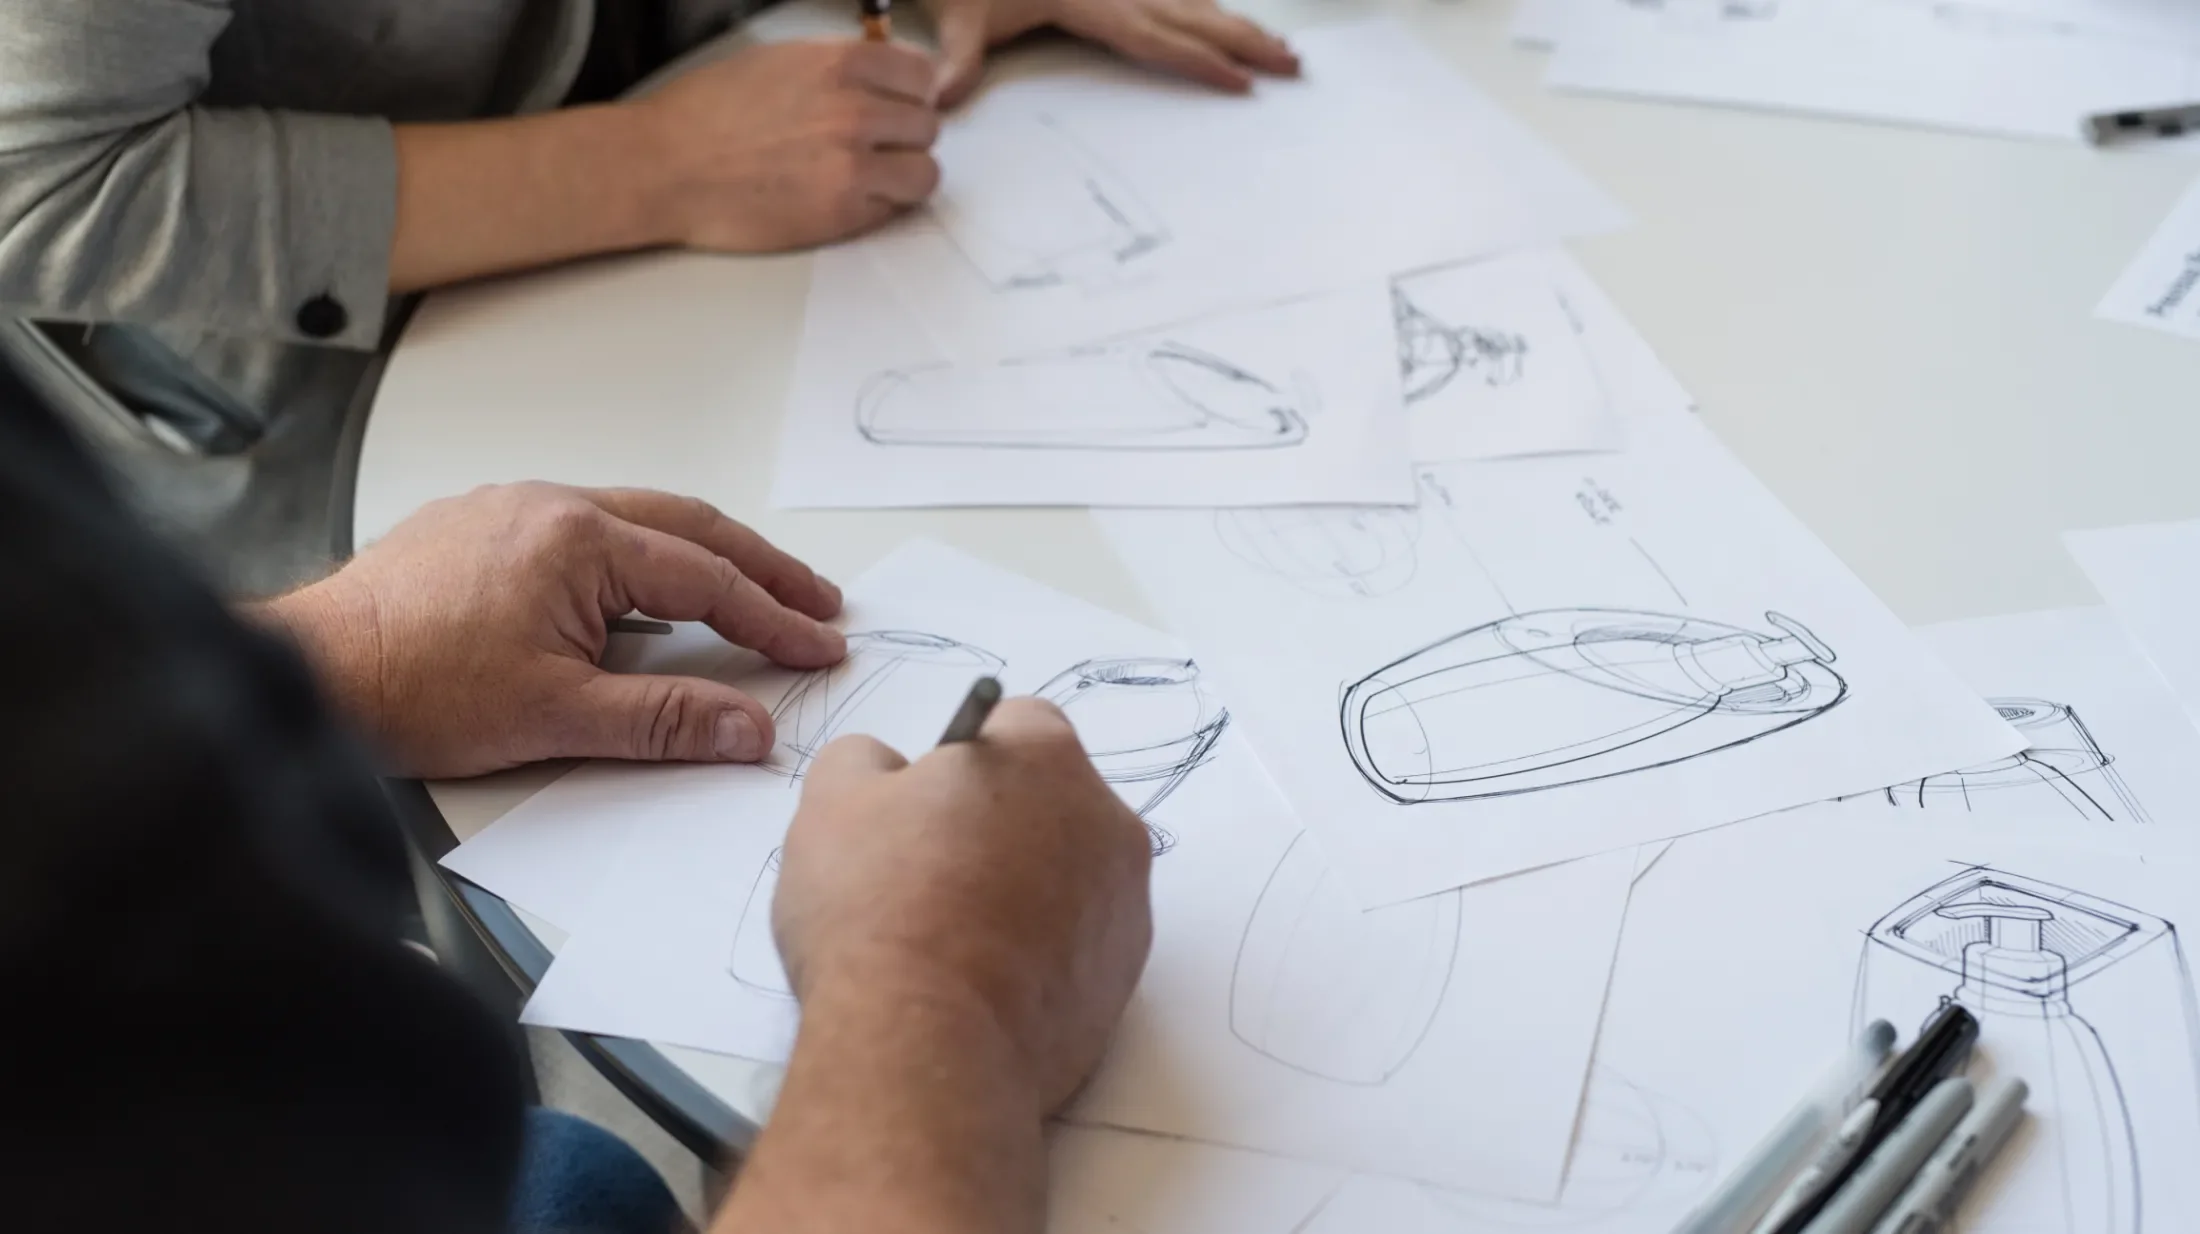 Two people sketching designs for a bottle holder